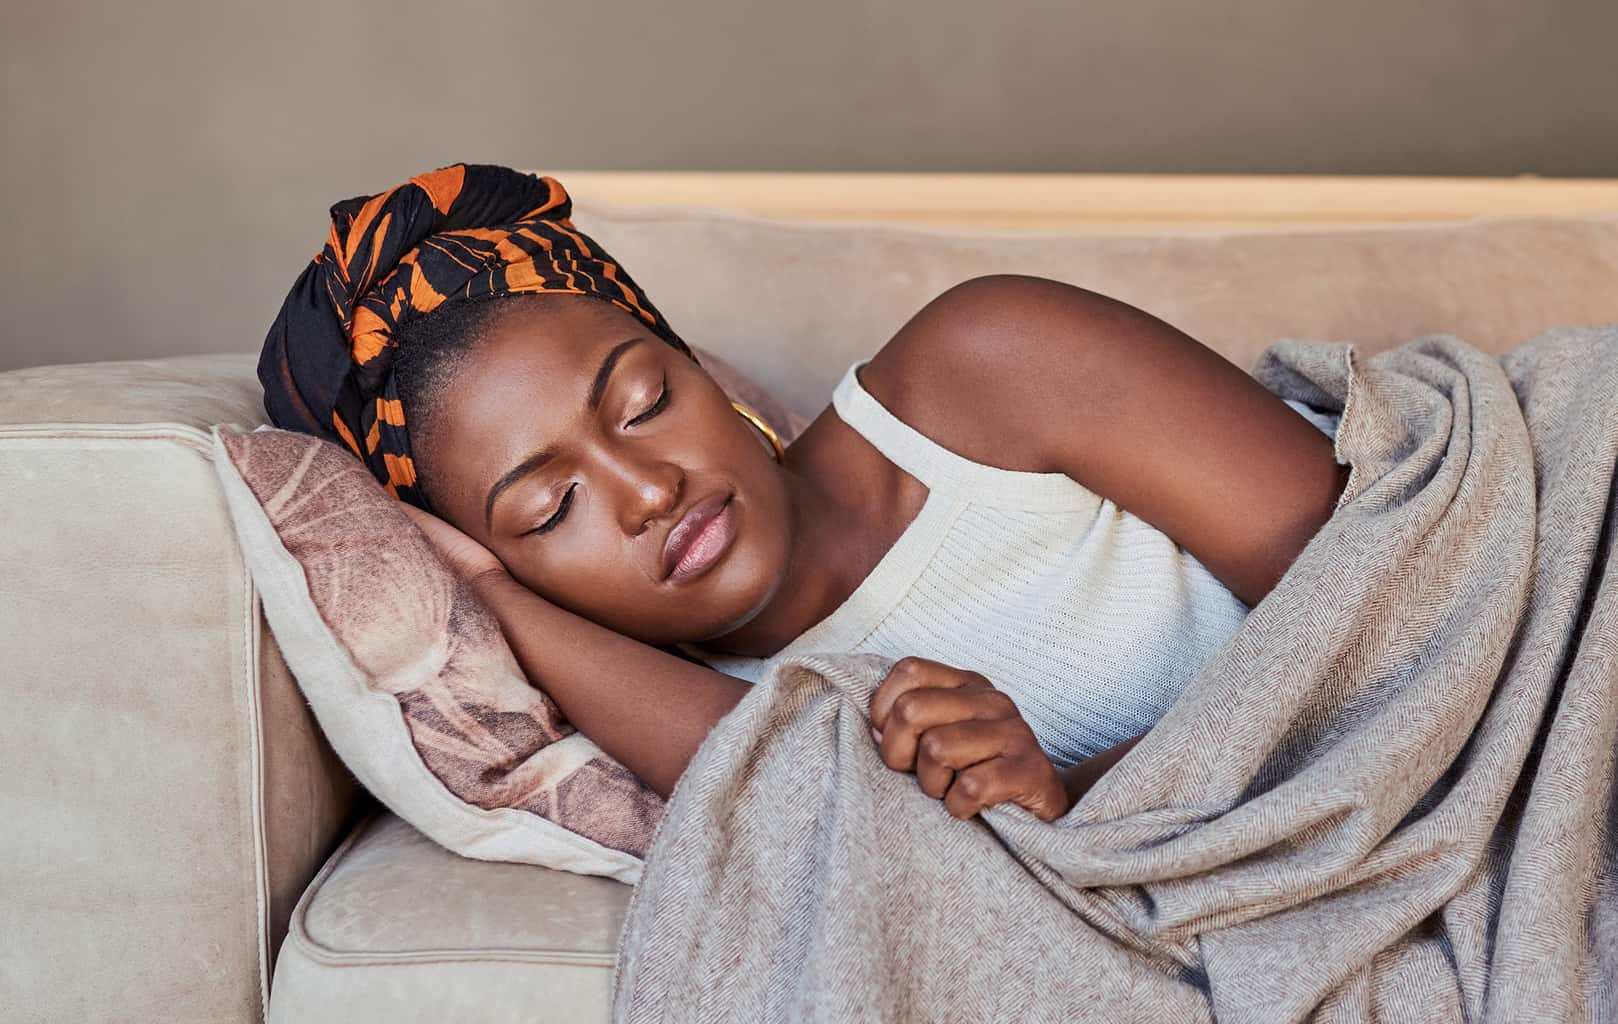 woman sleeping on couch who needs sleep tips on how to get to sleep and know wind down before bed meaning